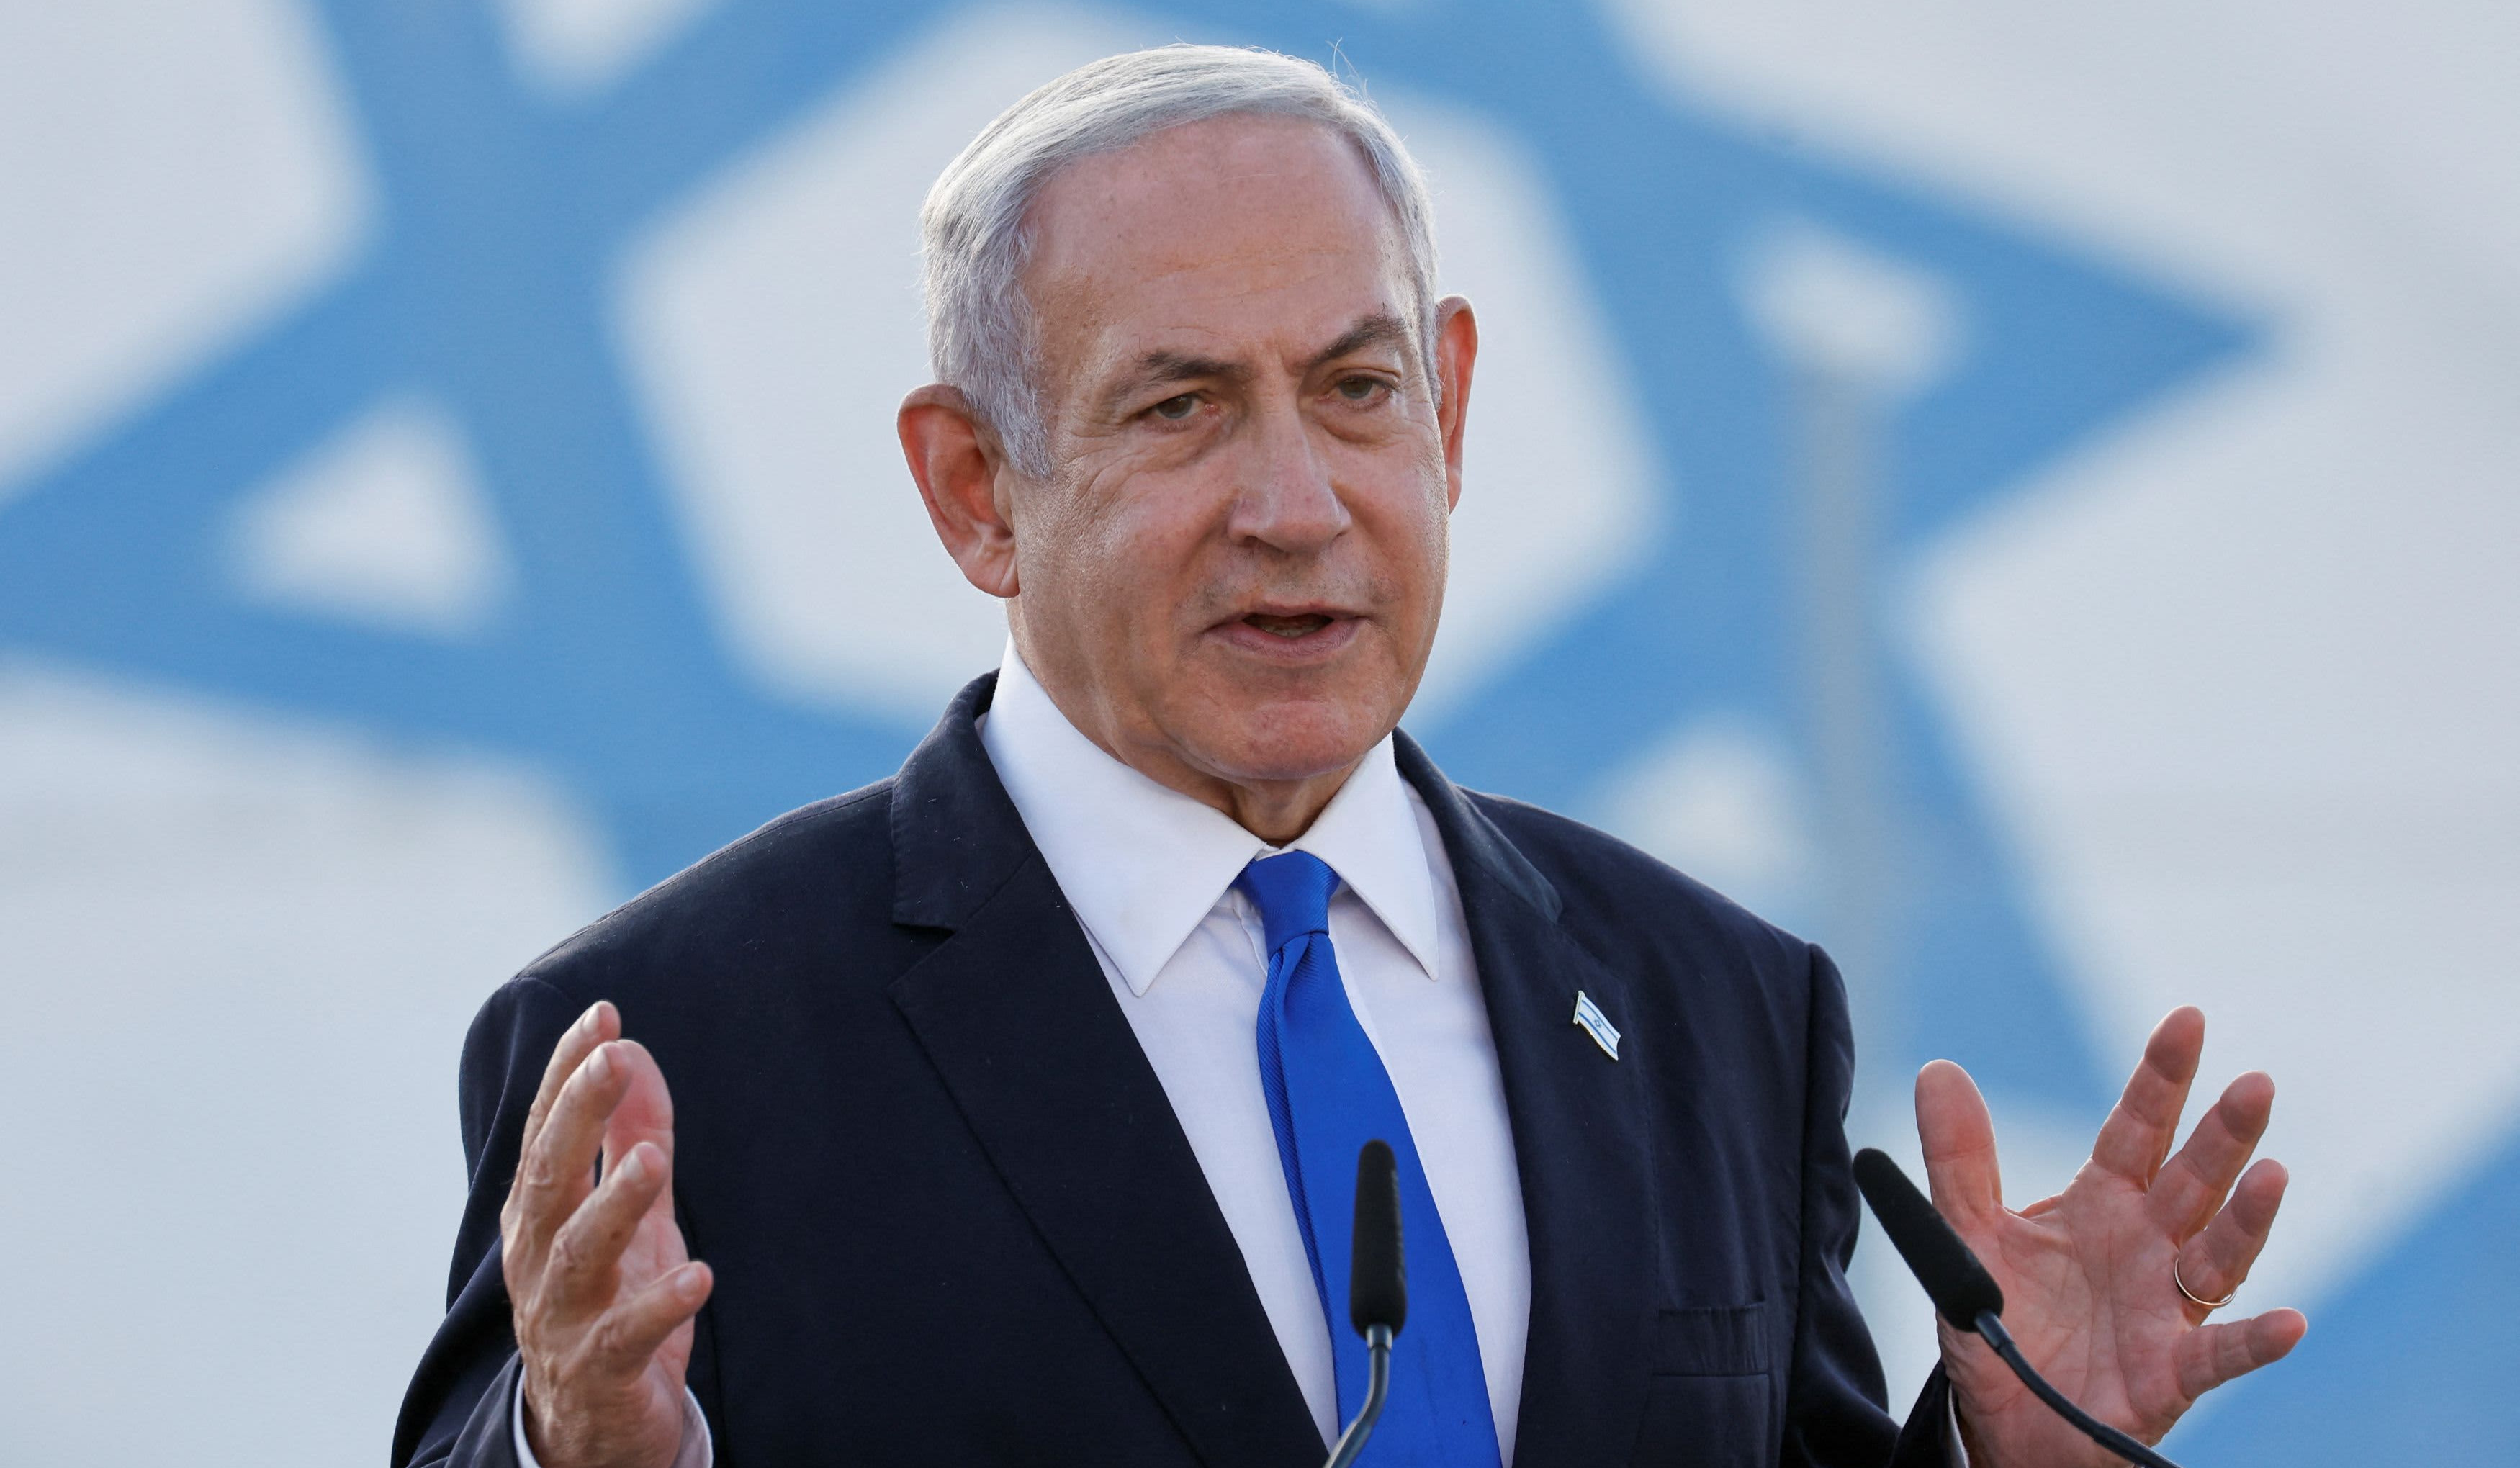 We’ll enter Rafah without US support if we have to: Netanyahu to Blinken